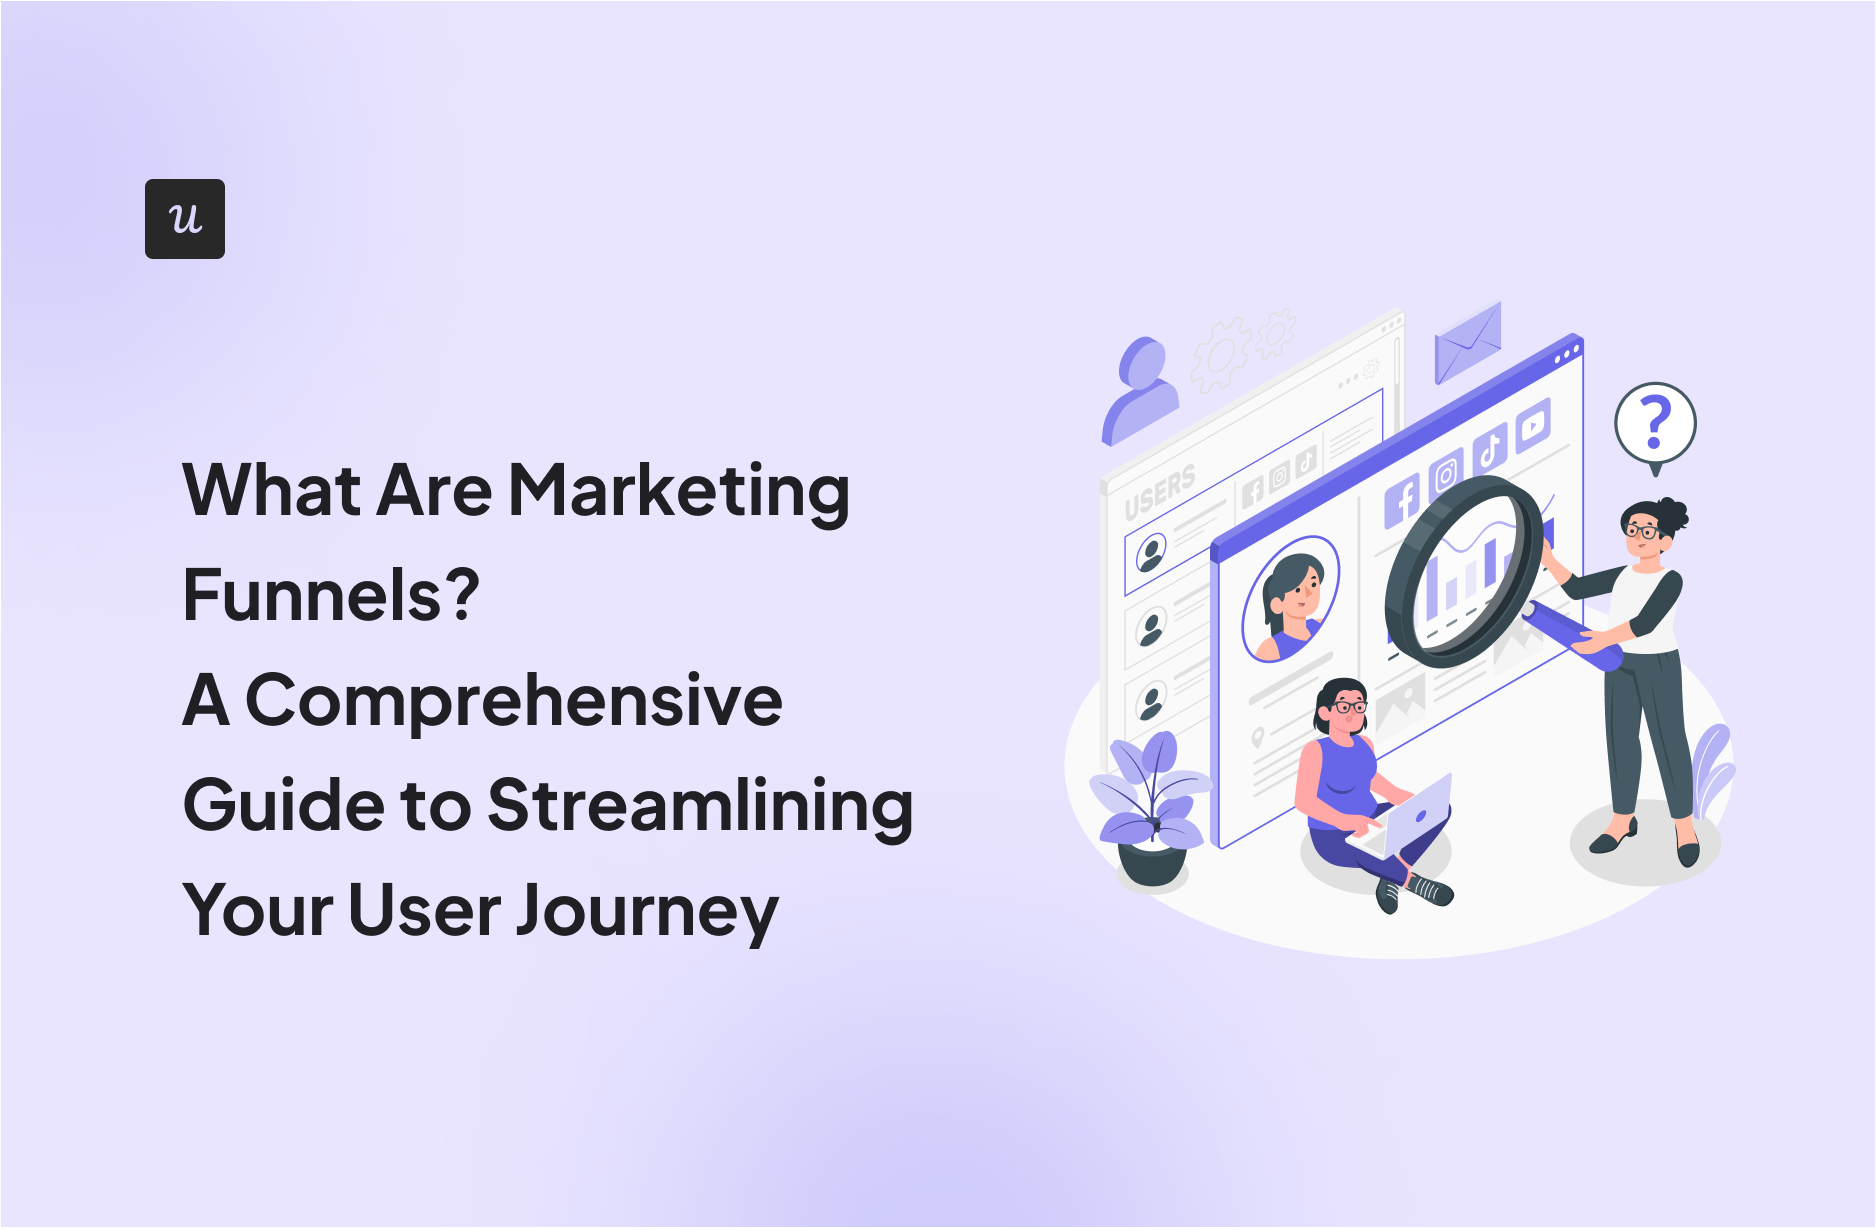 What Are Marketing Funnels? A Comprehensive Guide to Streamlining Your User Journey